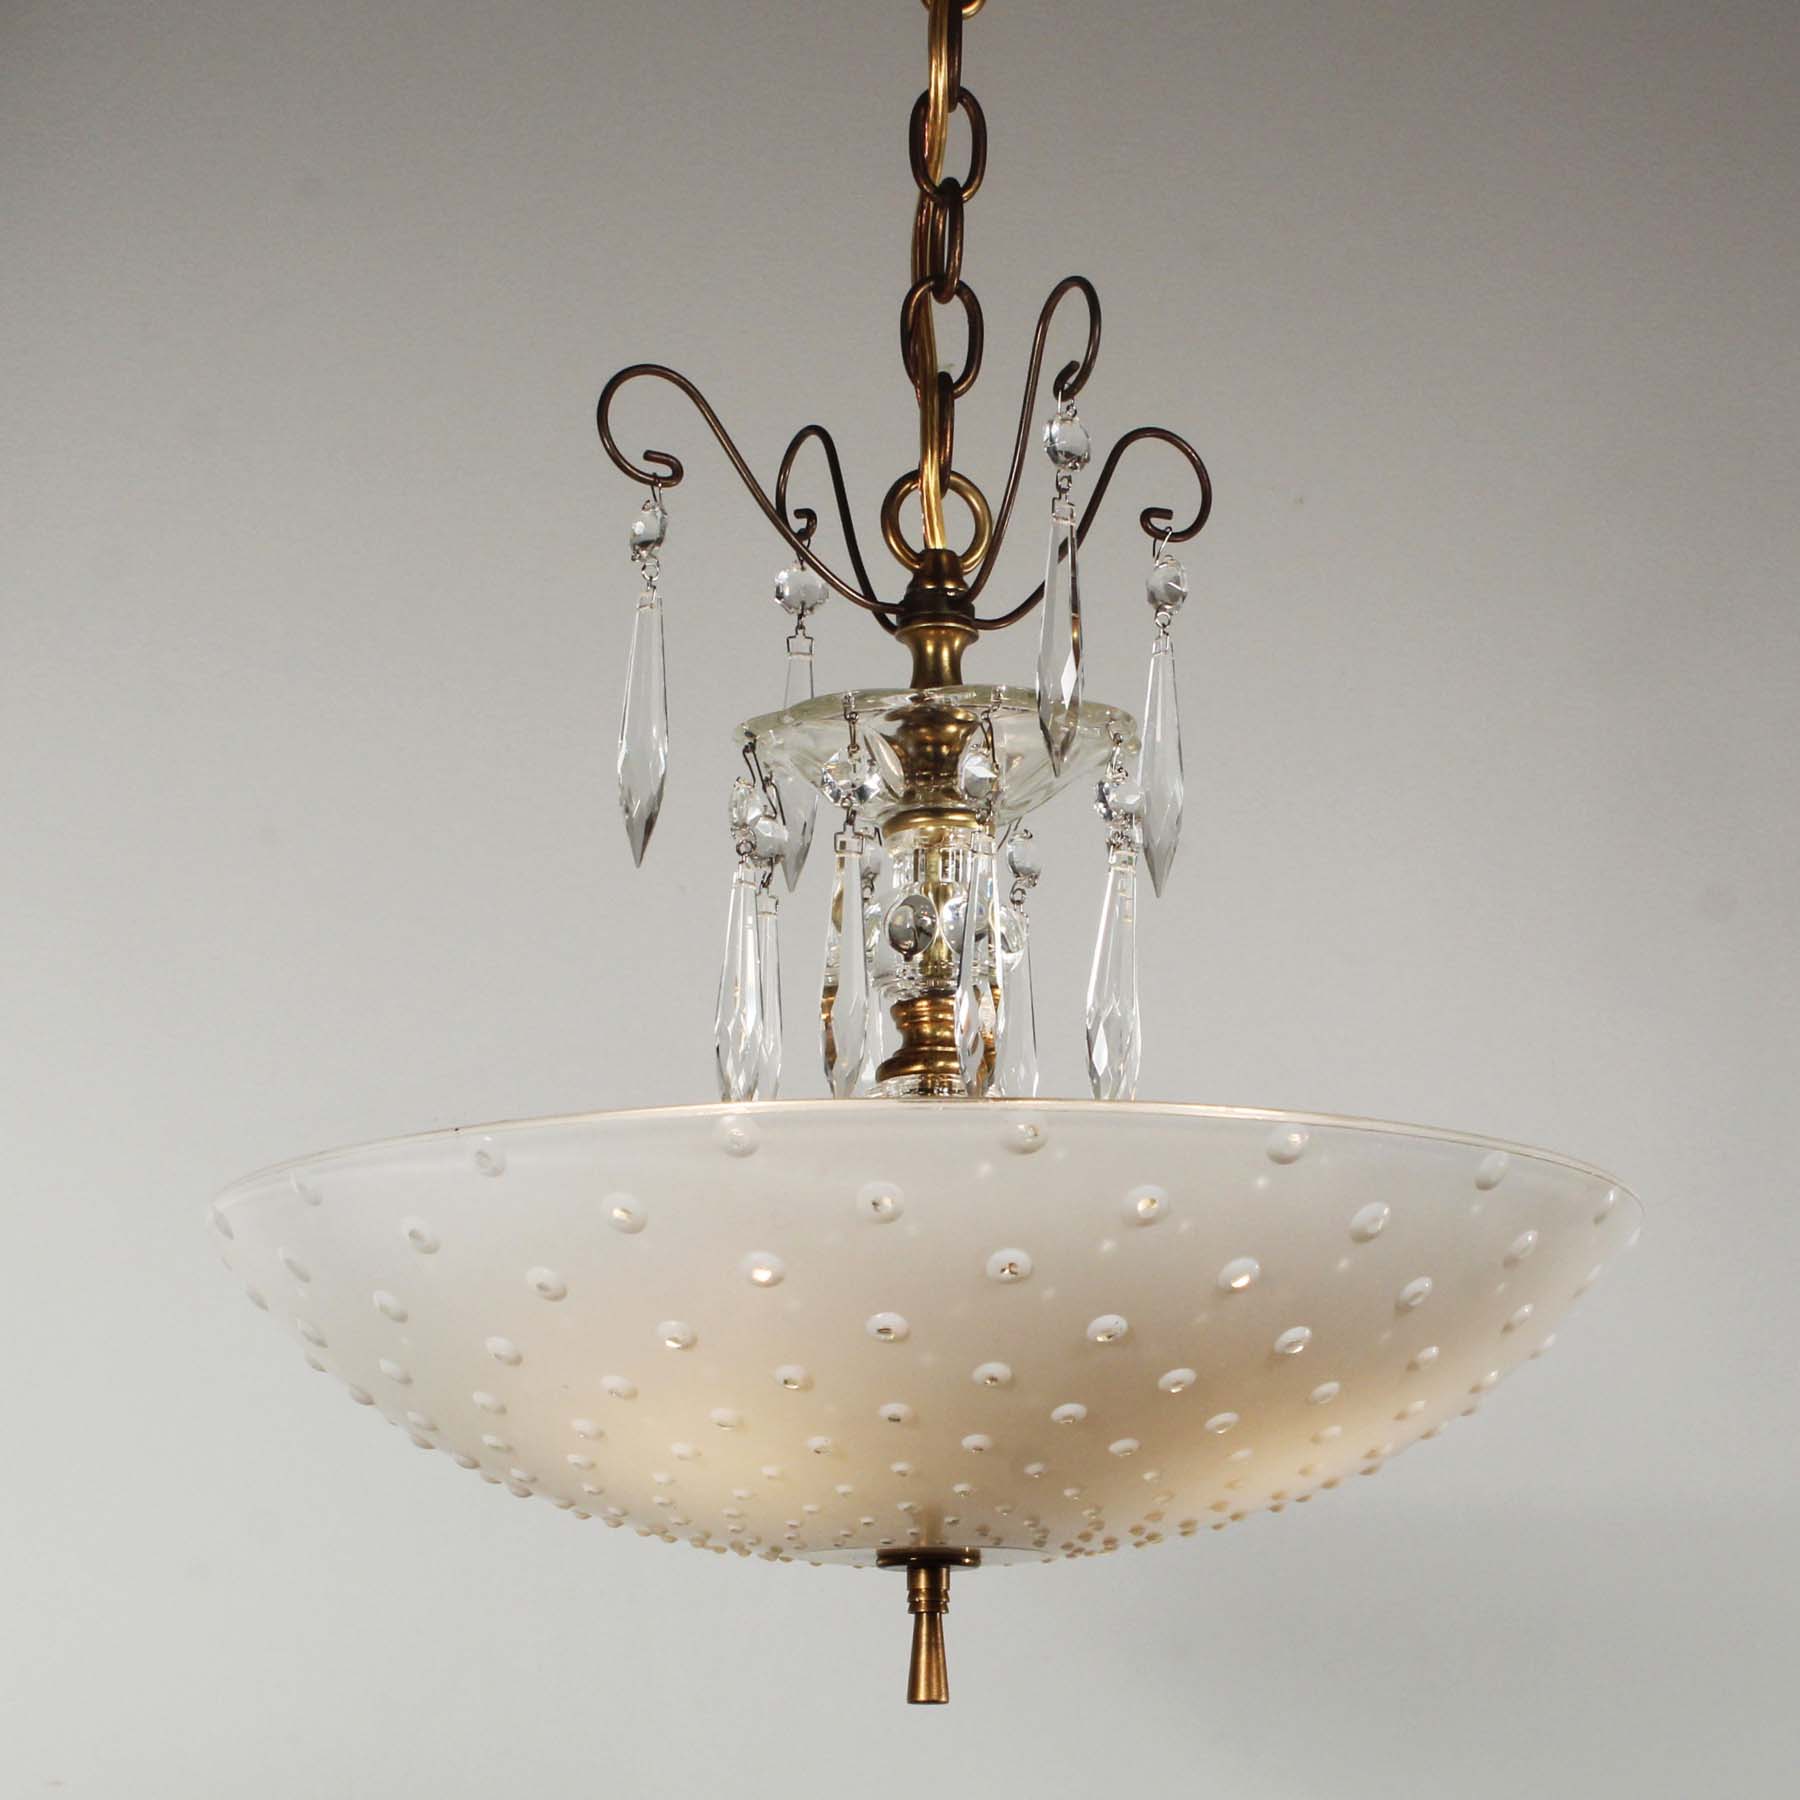 SOLD Vintage Brass Pendant Light with Hobnail Glass Shade, c.1940-67592